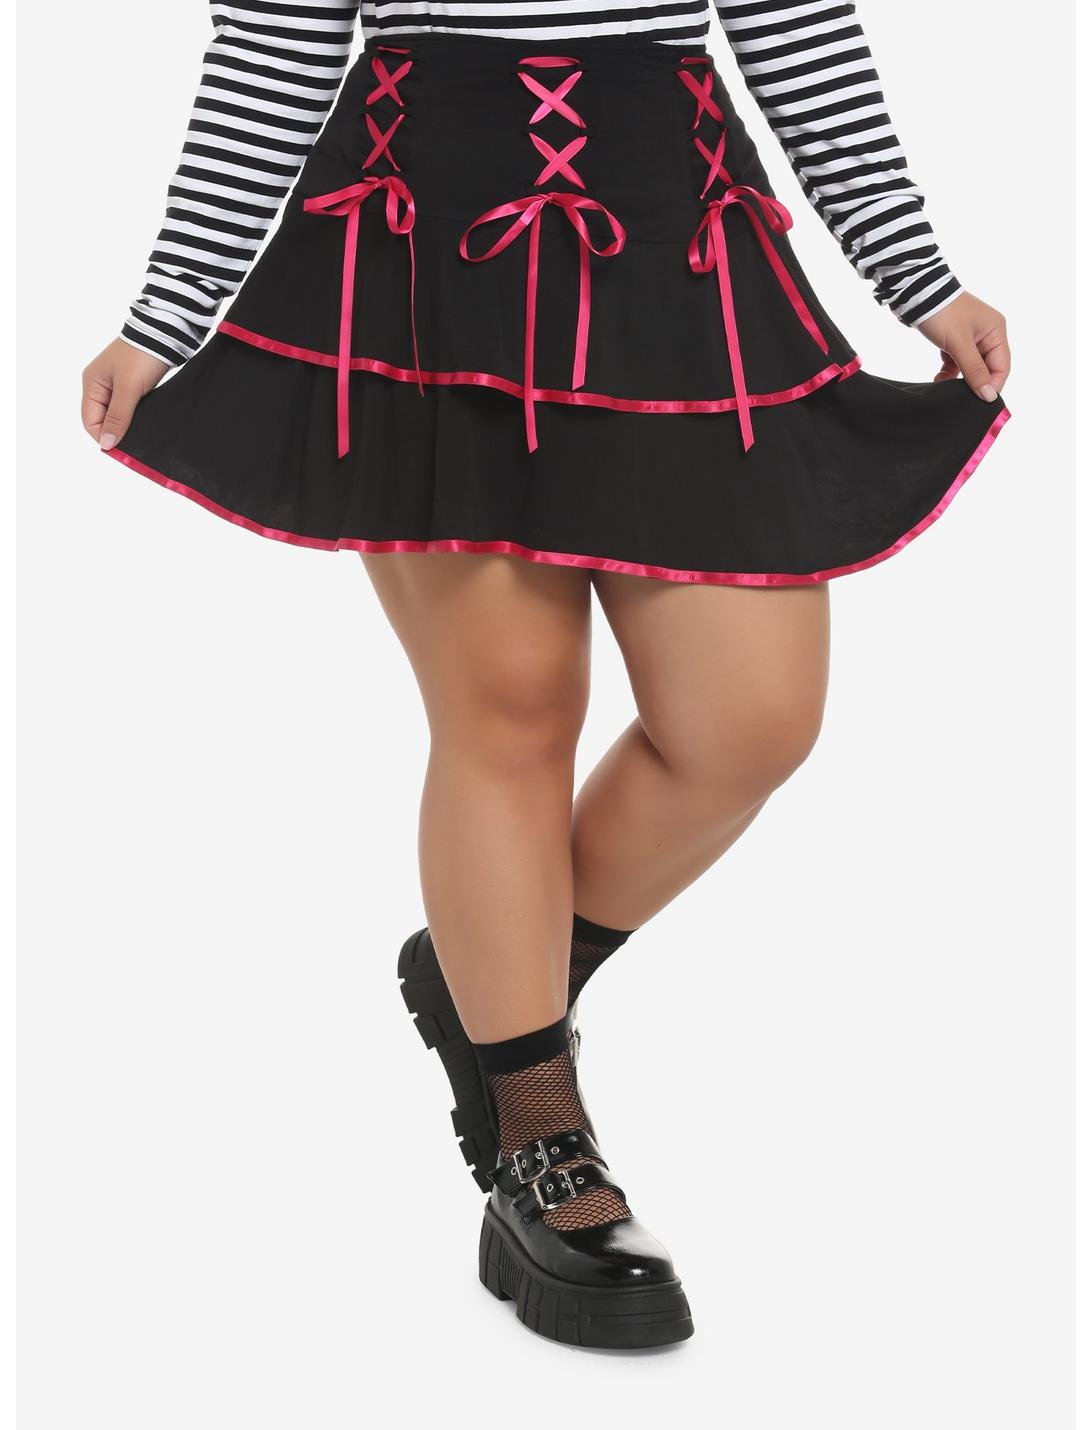 Black & Pink Lace-Up Tiered Skirt Plus Size, PINK, hi-res